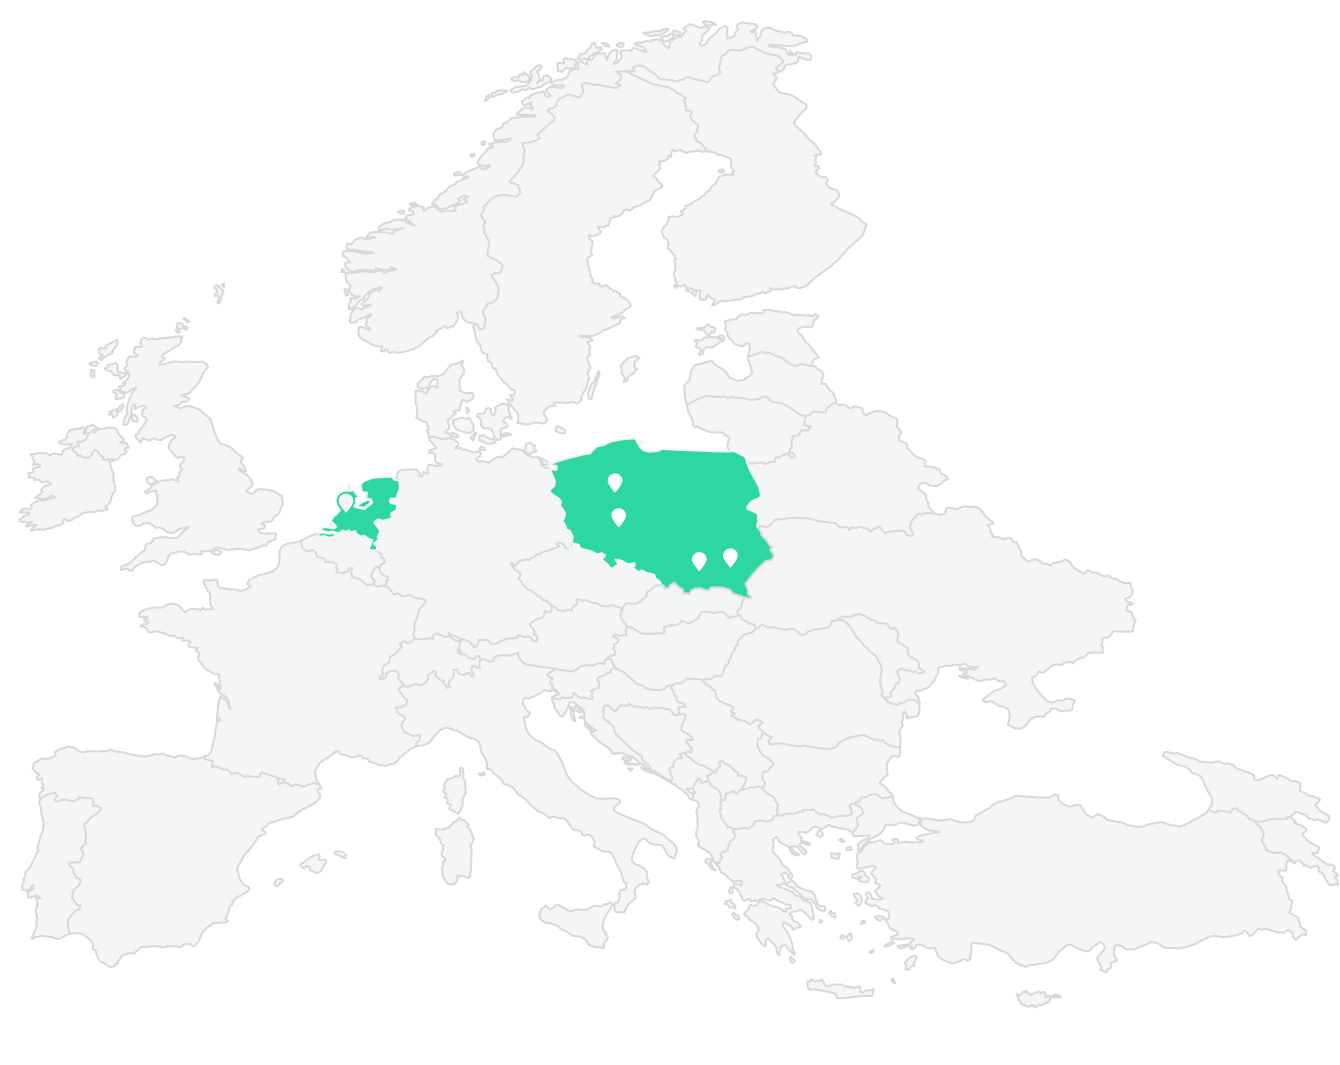 Map of Europe with Poland and the Netherlands Highlighted